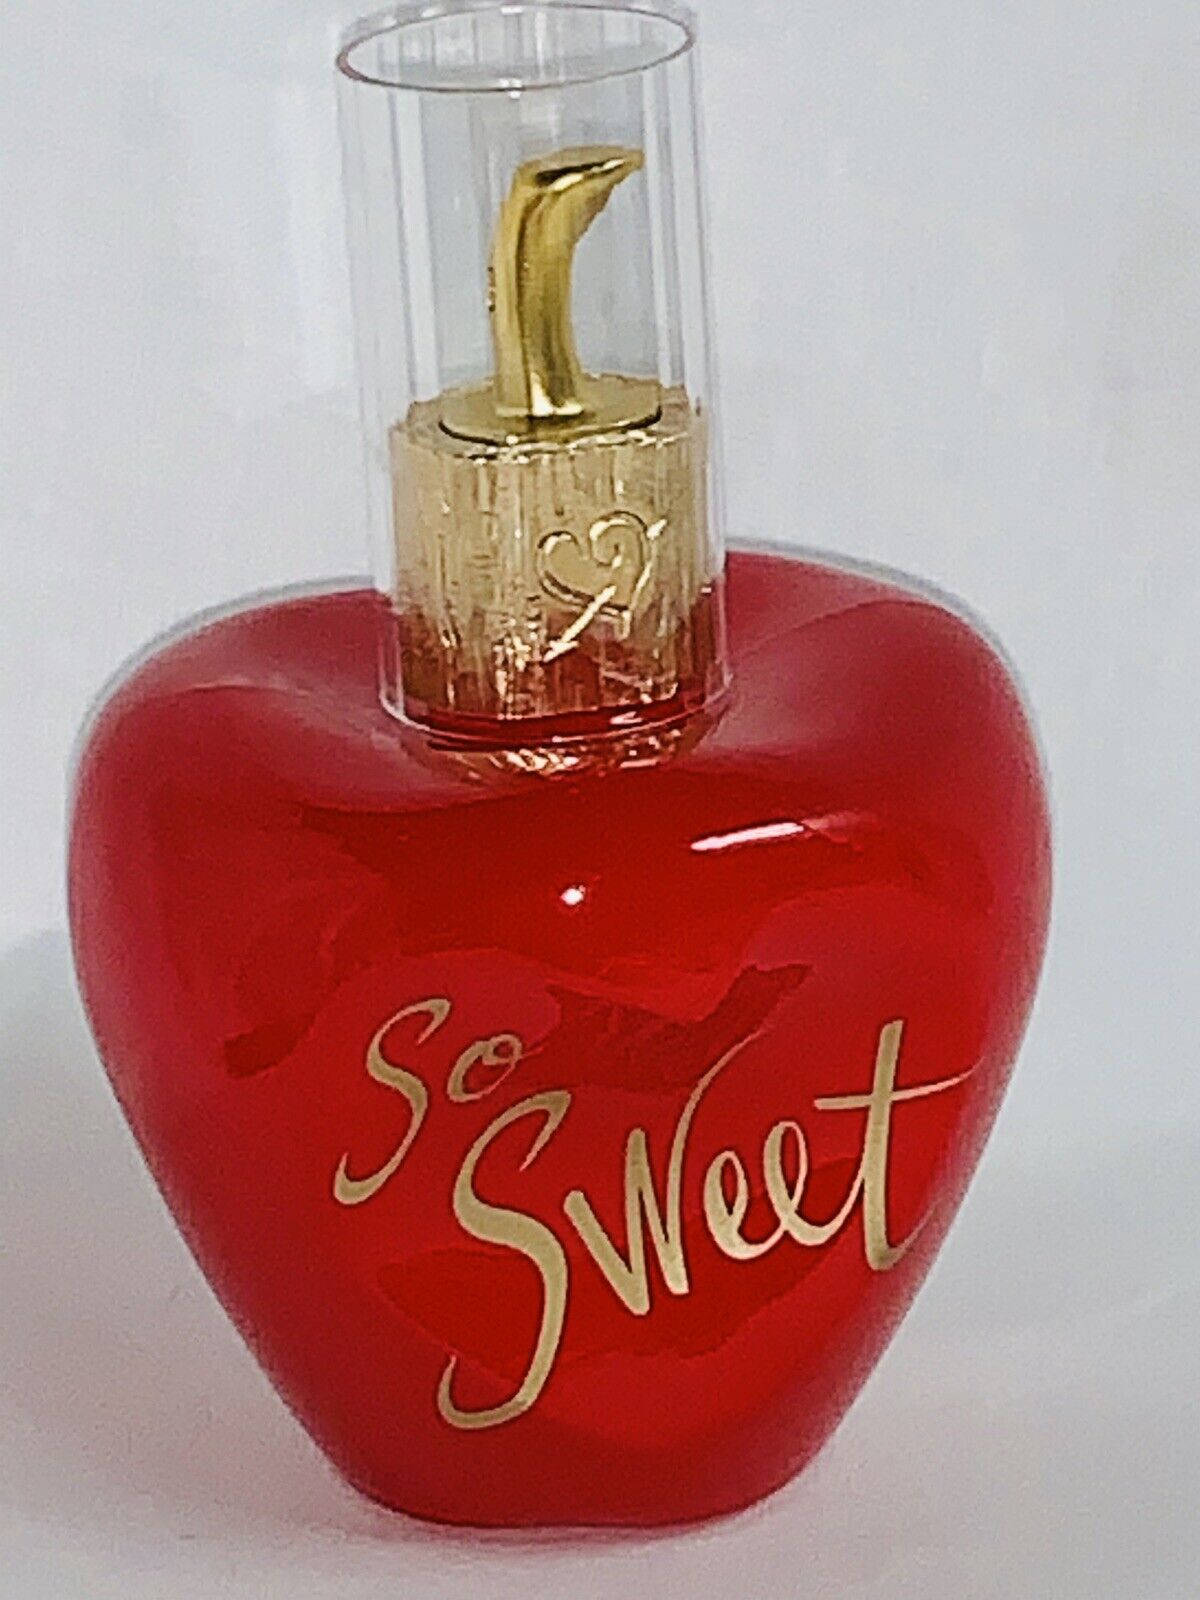 SO SWEET by Lolita Lempicka perfume oz 2.7 women for Special sale item Ranking TOP15 EDP